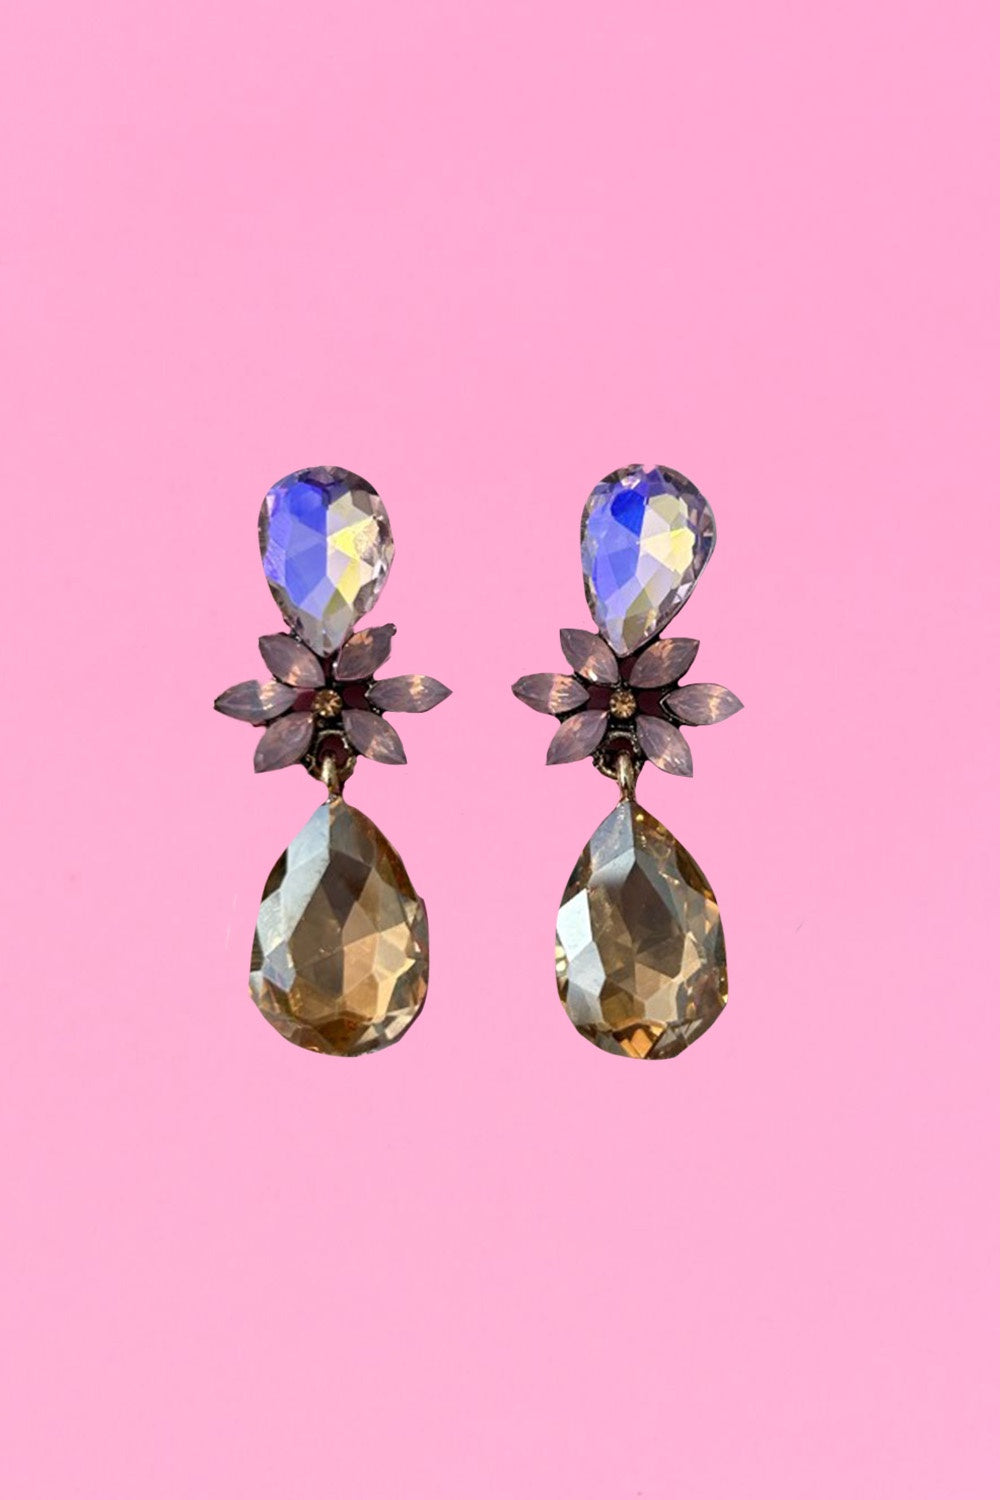 The Annah Stretton Bejewelled Drop Earrings in gold